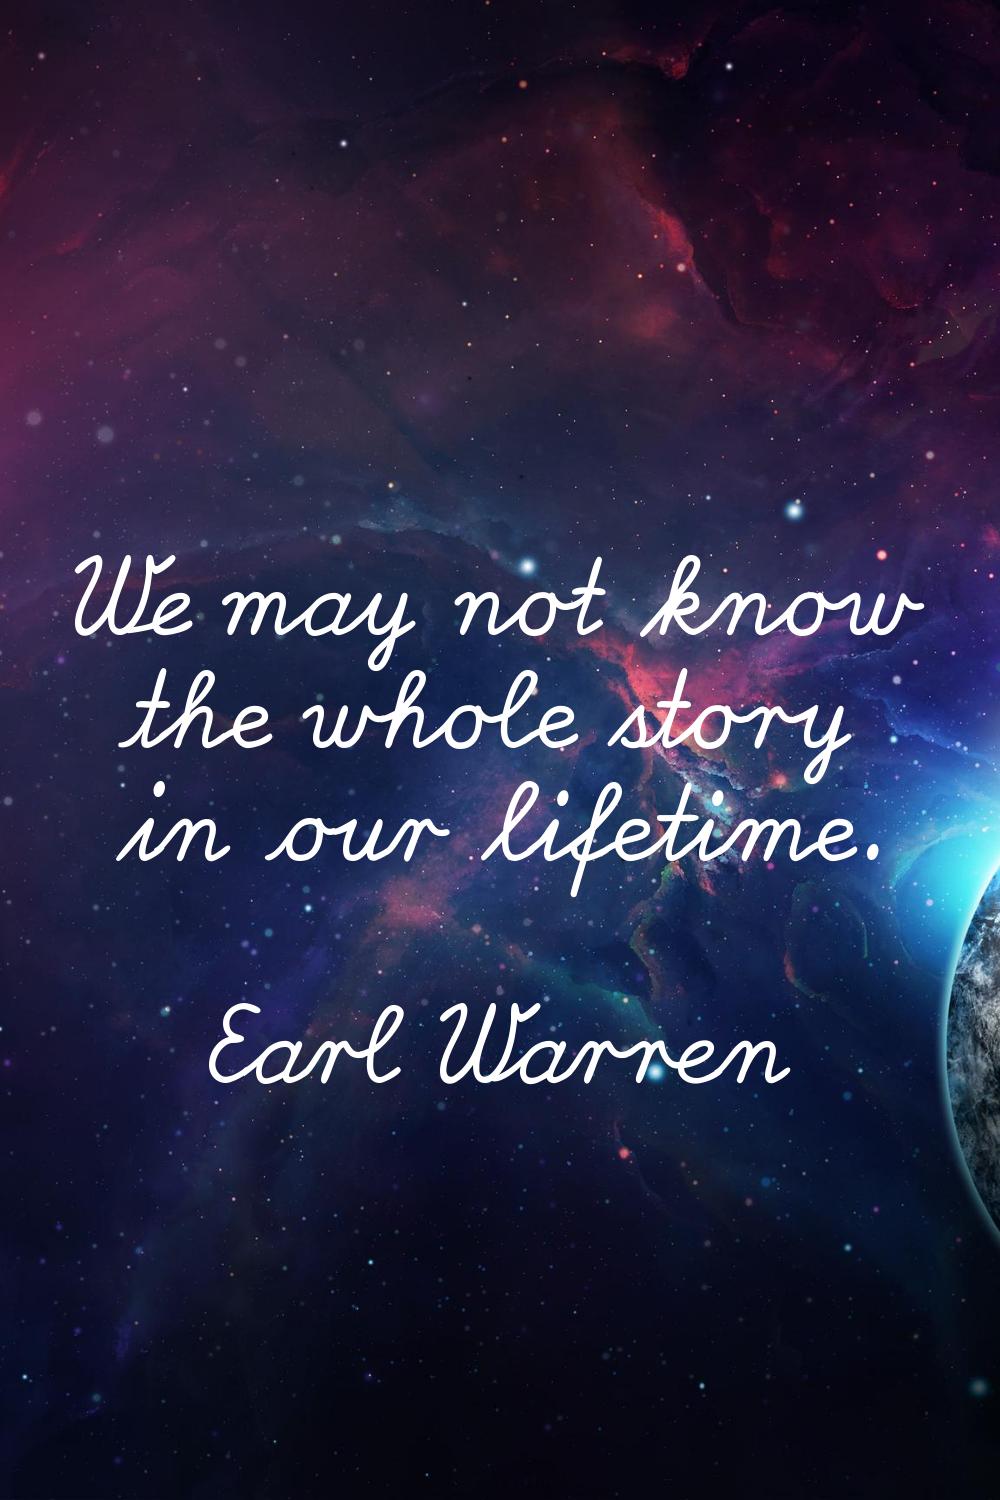 We may not know the whole story in our lifetime.